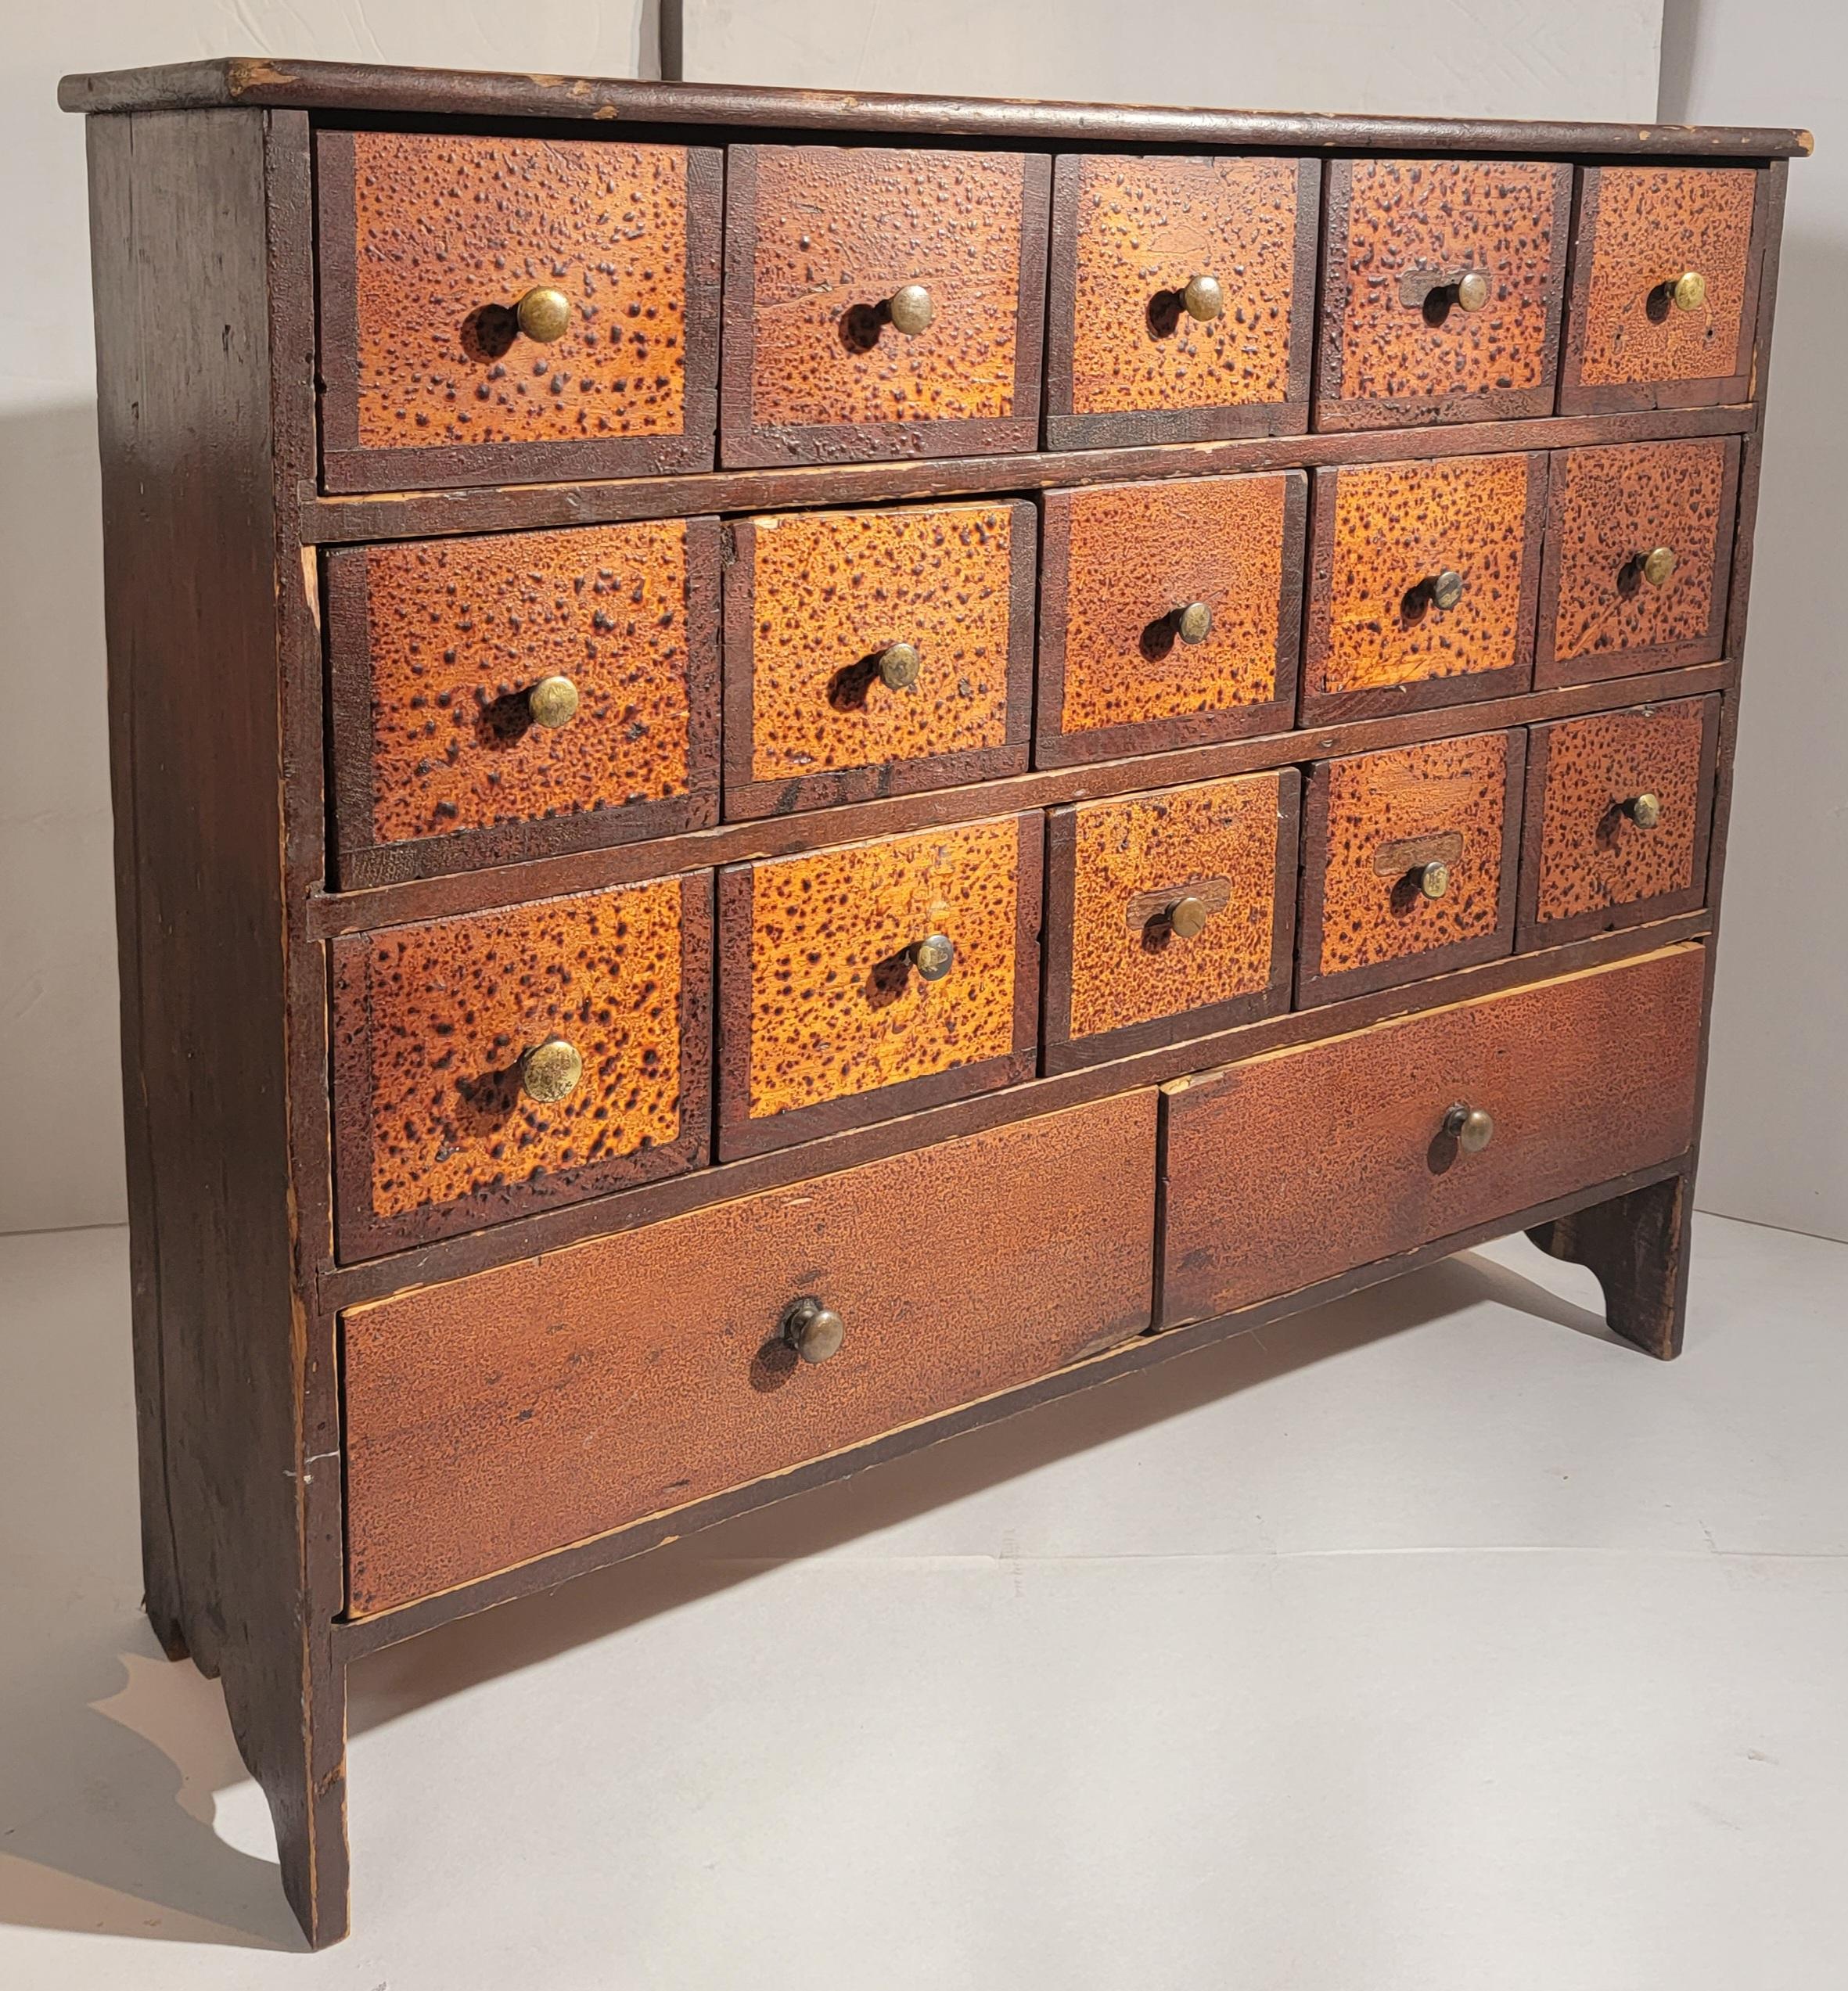 This 19thc apothecary cabinet in original painted surface and original brass pulls and cut nailed construction.This cabinet has seventeen drawers and square nailed construction.